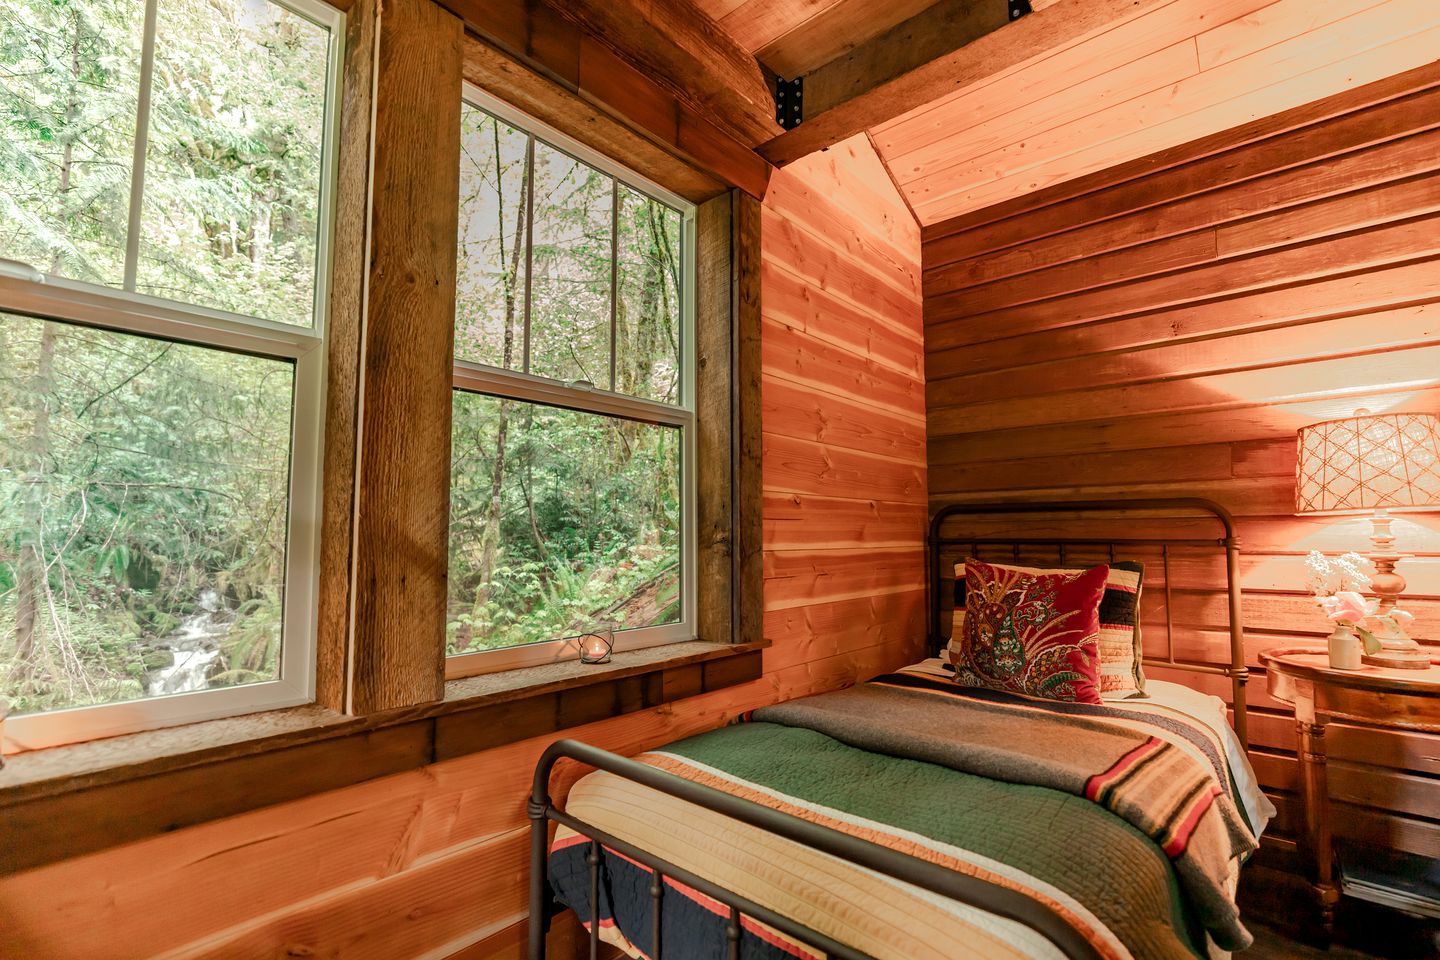 The cabin interior with wood walls, a bed and window